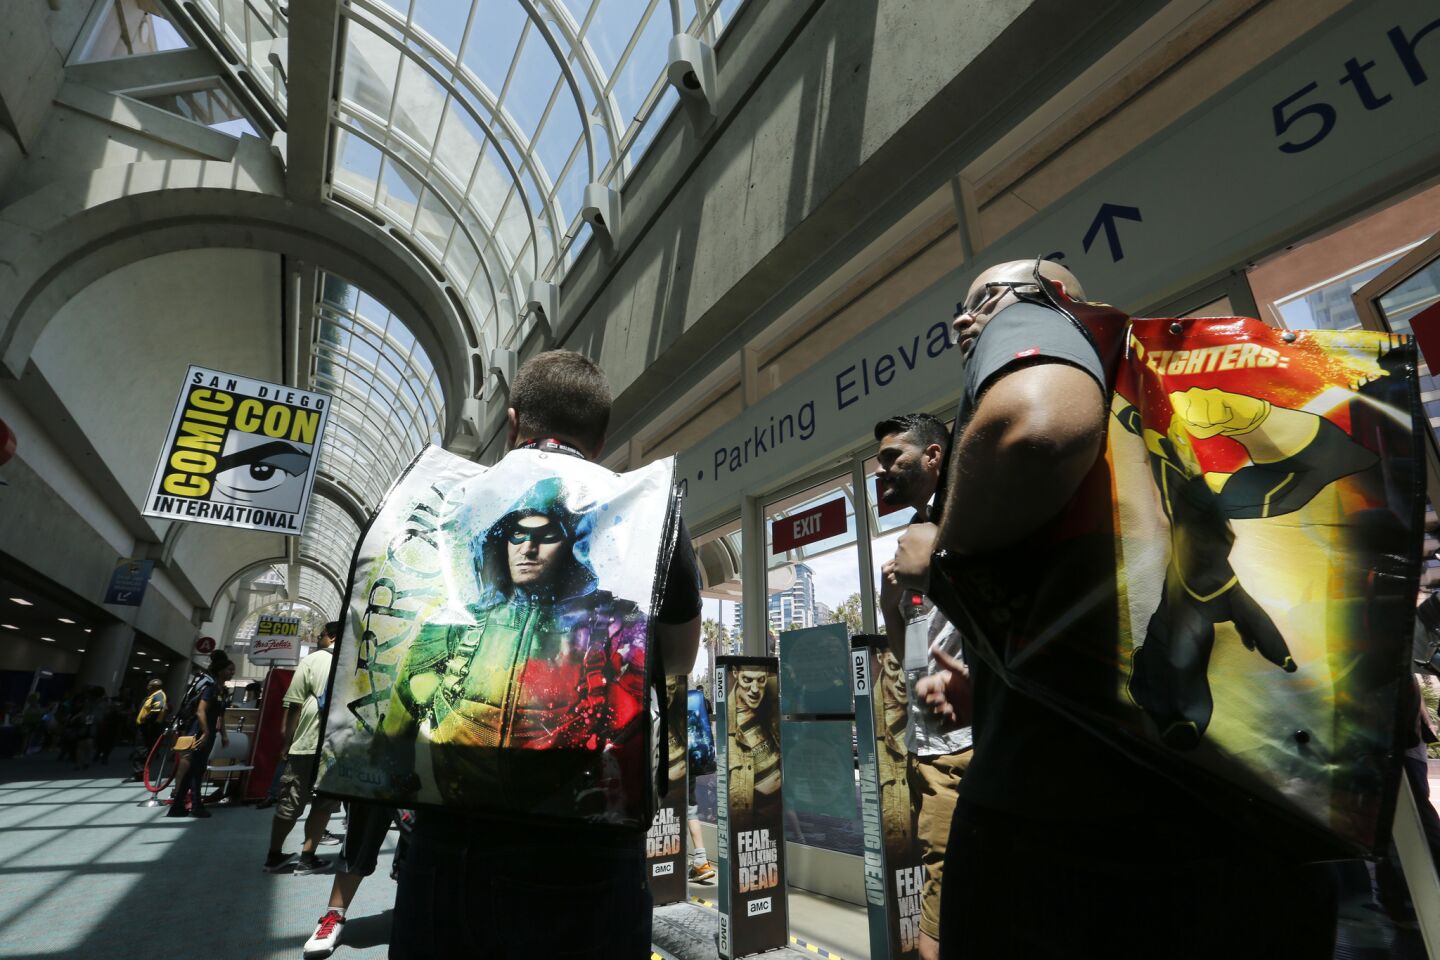 Mauricio Leal, left, and Rodolfo Resendez, both of Monterrey, Mexico, pick up their entry badges and bags to Comic-Con International 2017 at the San Diego Convention Center.